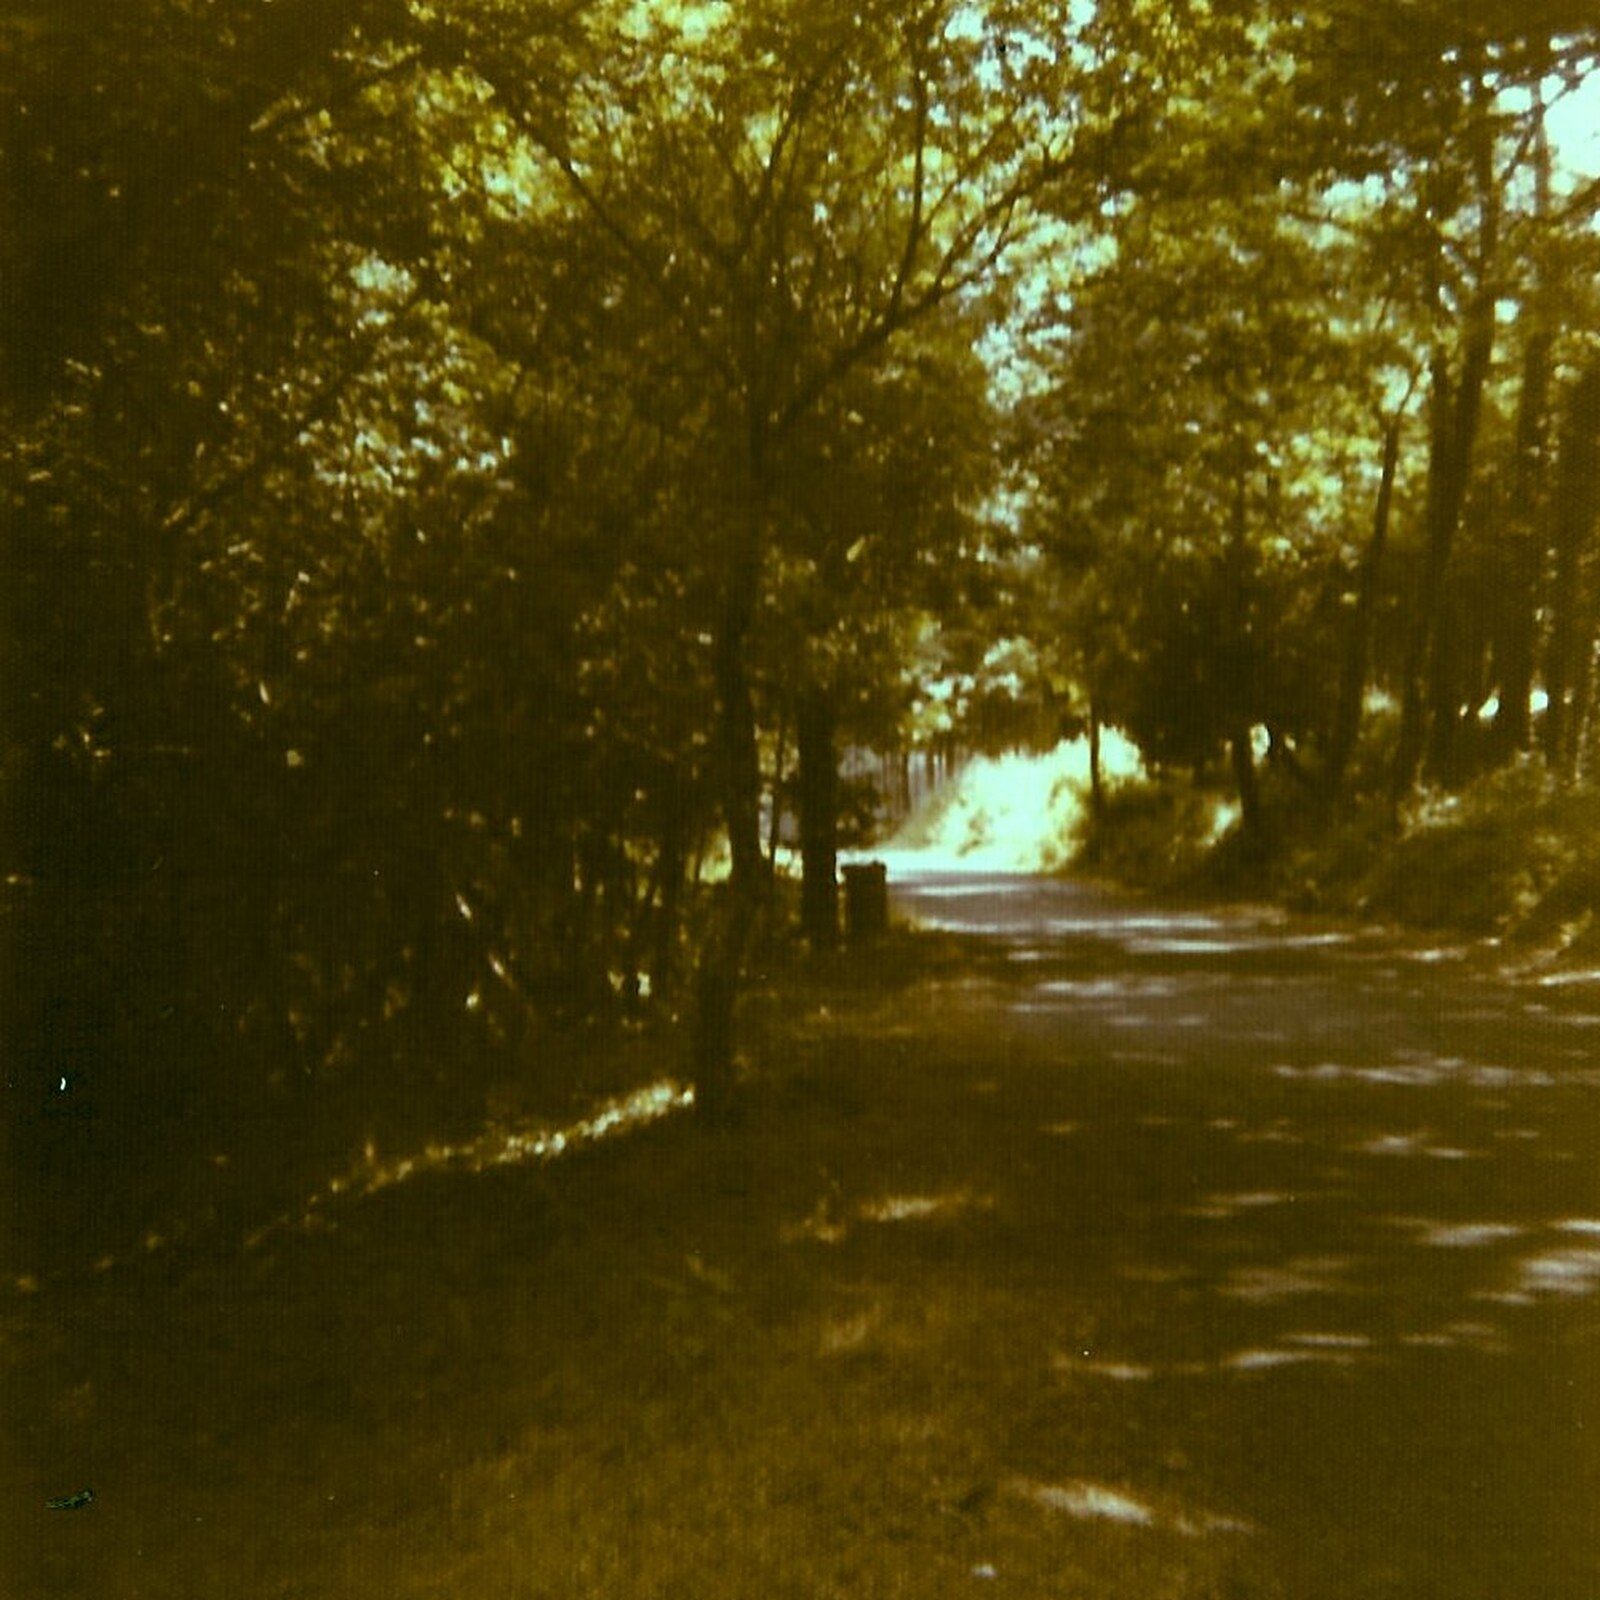 A tree-lined road to somewhere from A Trip to Bram, Aude, France - 25th July 1980